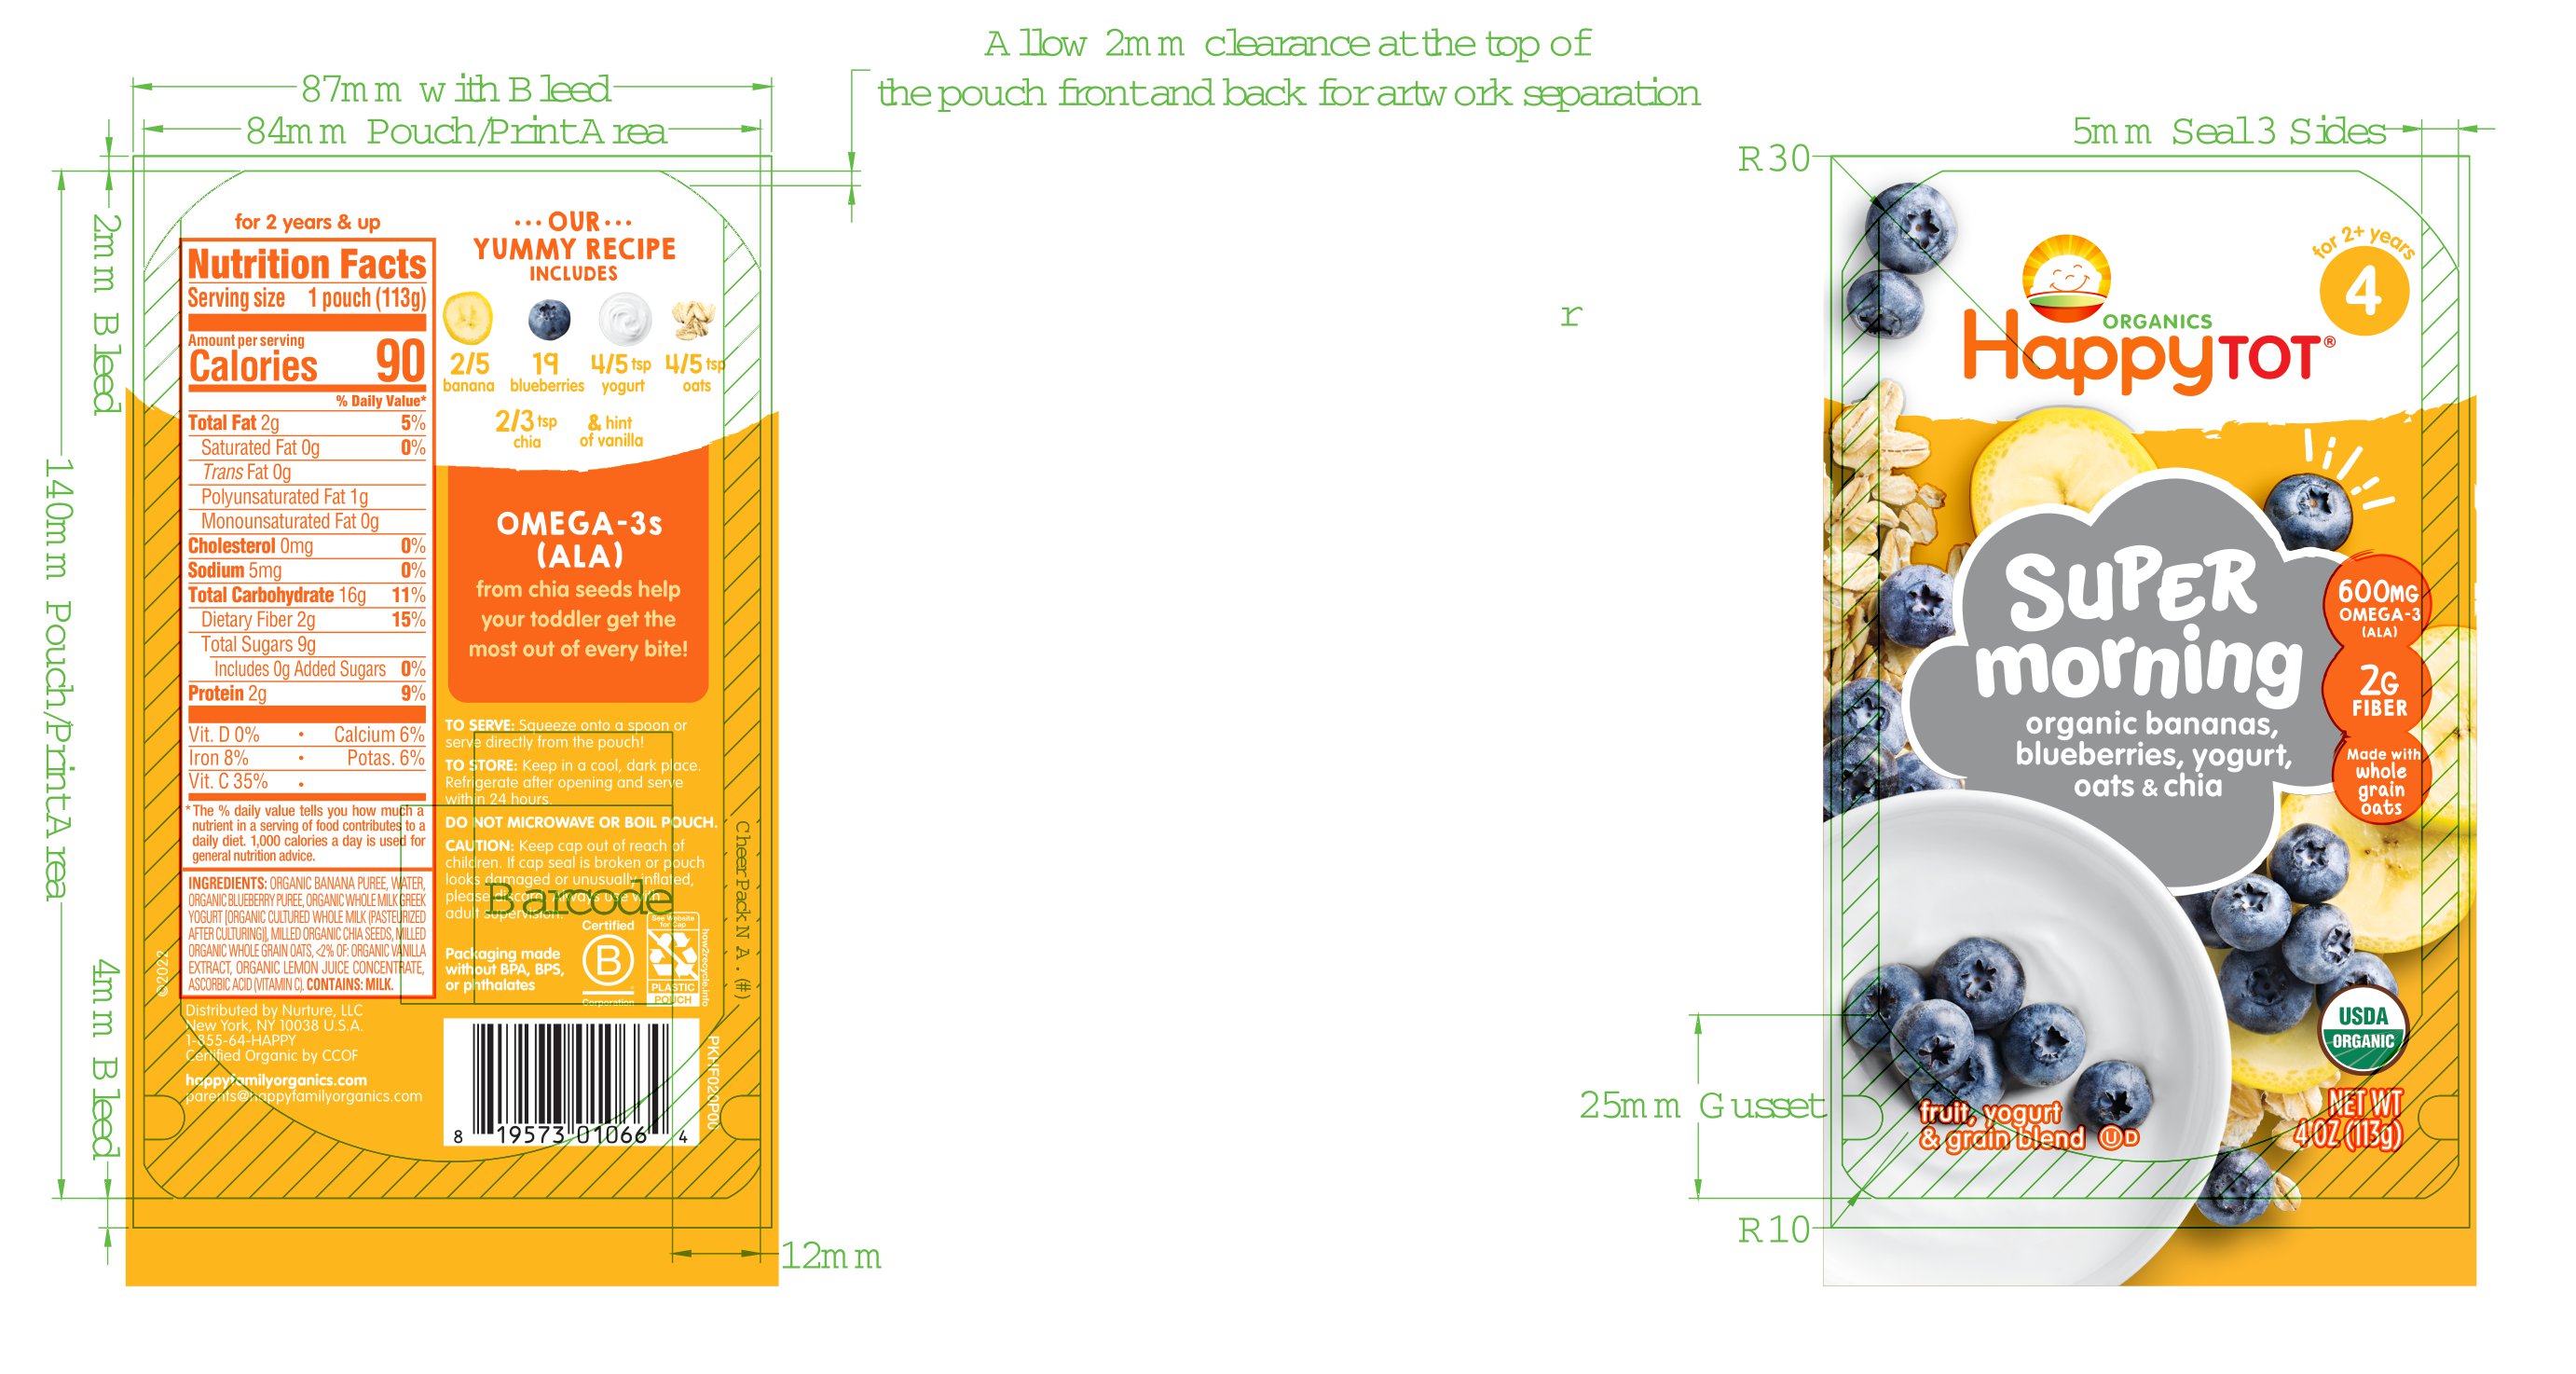 Happy Tot Super Morning Stage 4 Organic Bananas, Blueberries, Yogurt & Oats with Super Chia Pouch 16 units per case 4.0 oz Product Label